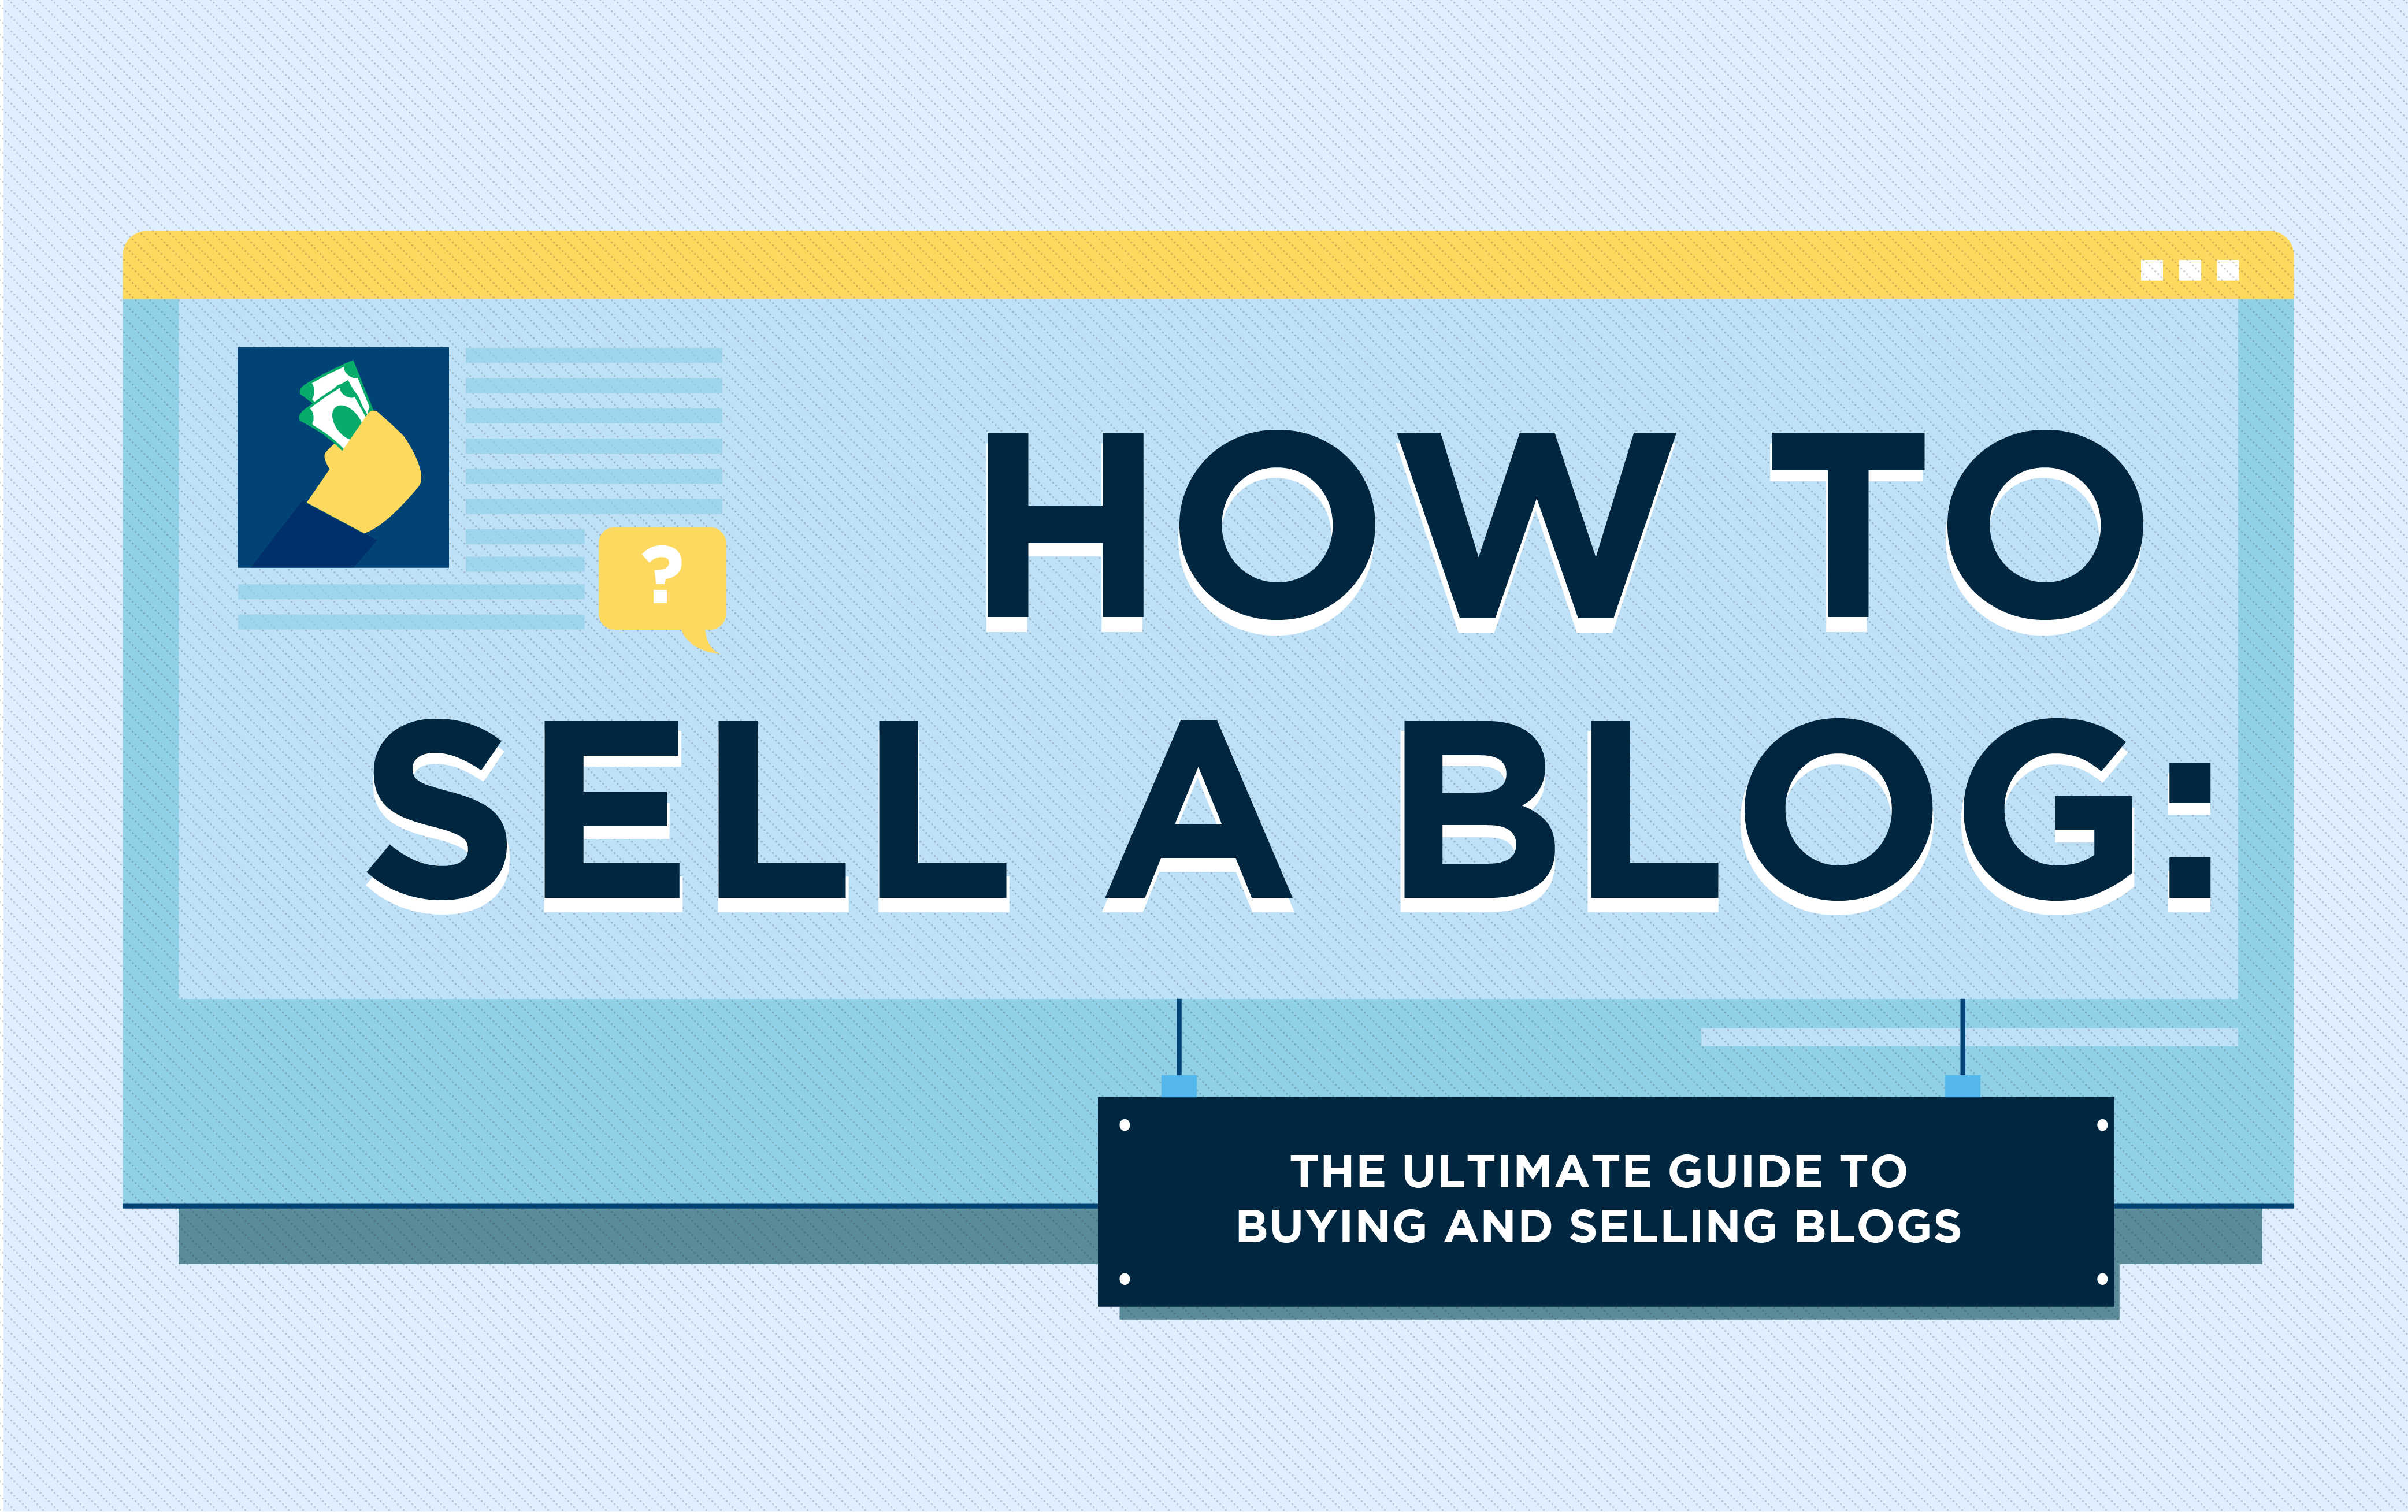 How-to-Sell-a-Blog